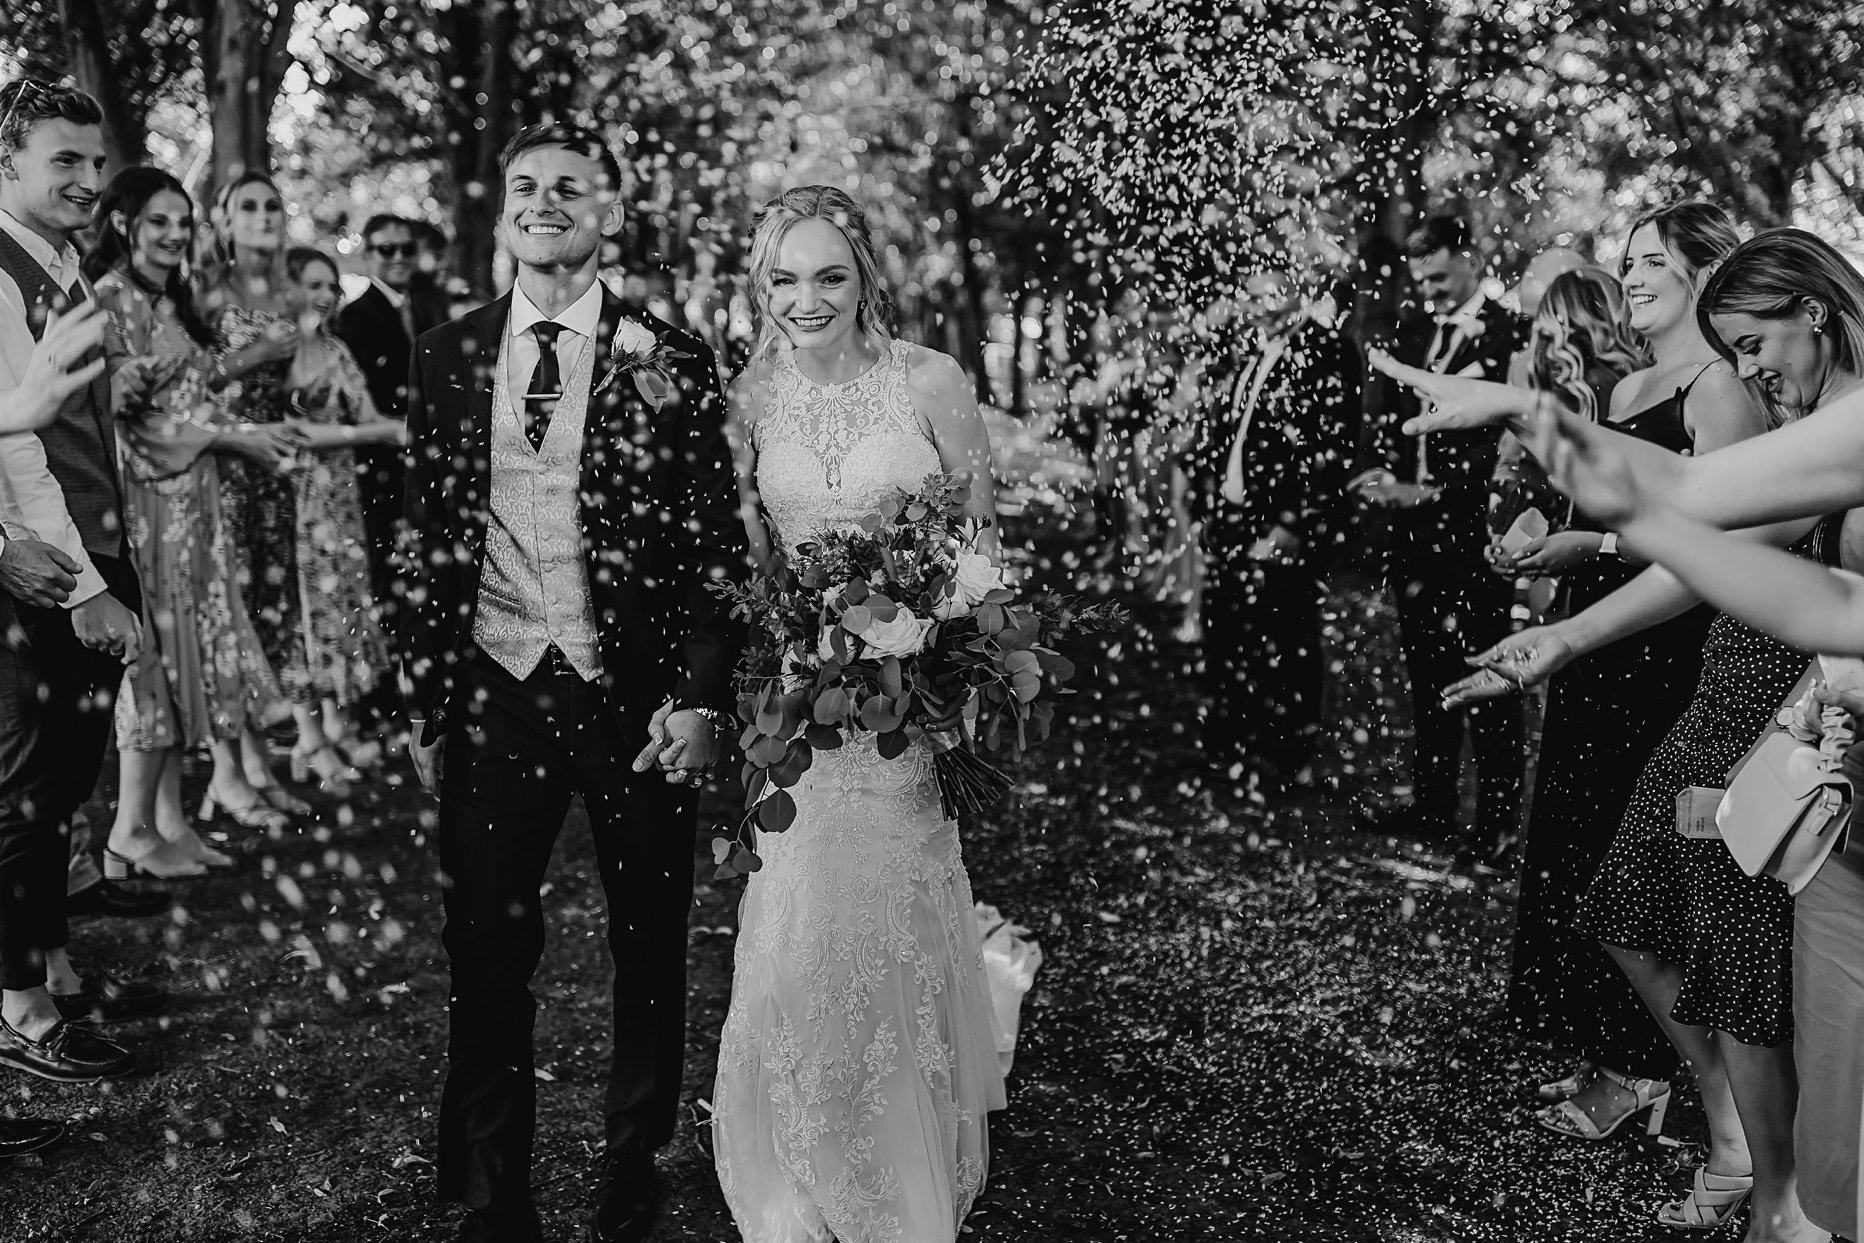 Black and white photograph of bride and groom walking through confetti tunnel at Saltmarshe Hall. They are both smiling whilst guests surround them throwing white confetti discs into the air.